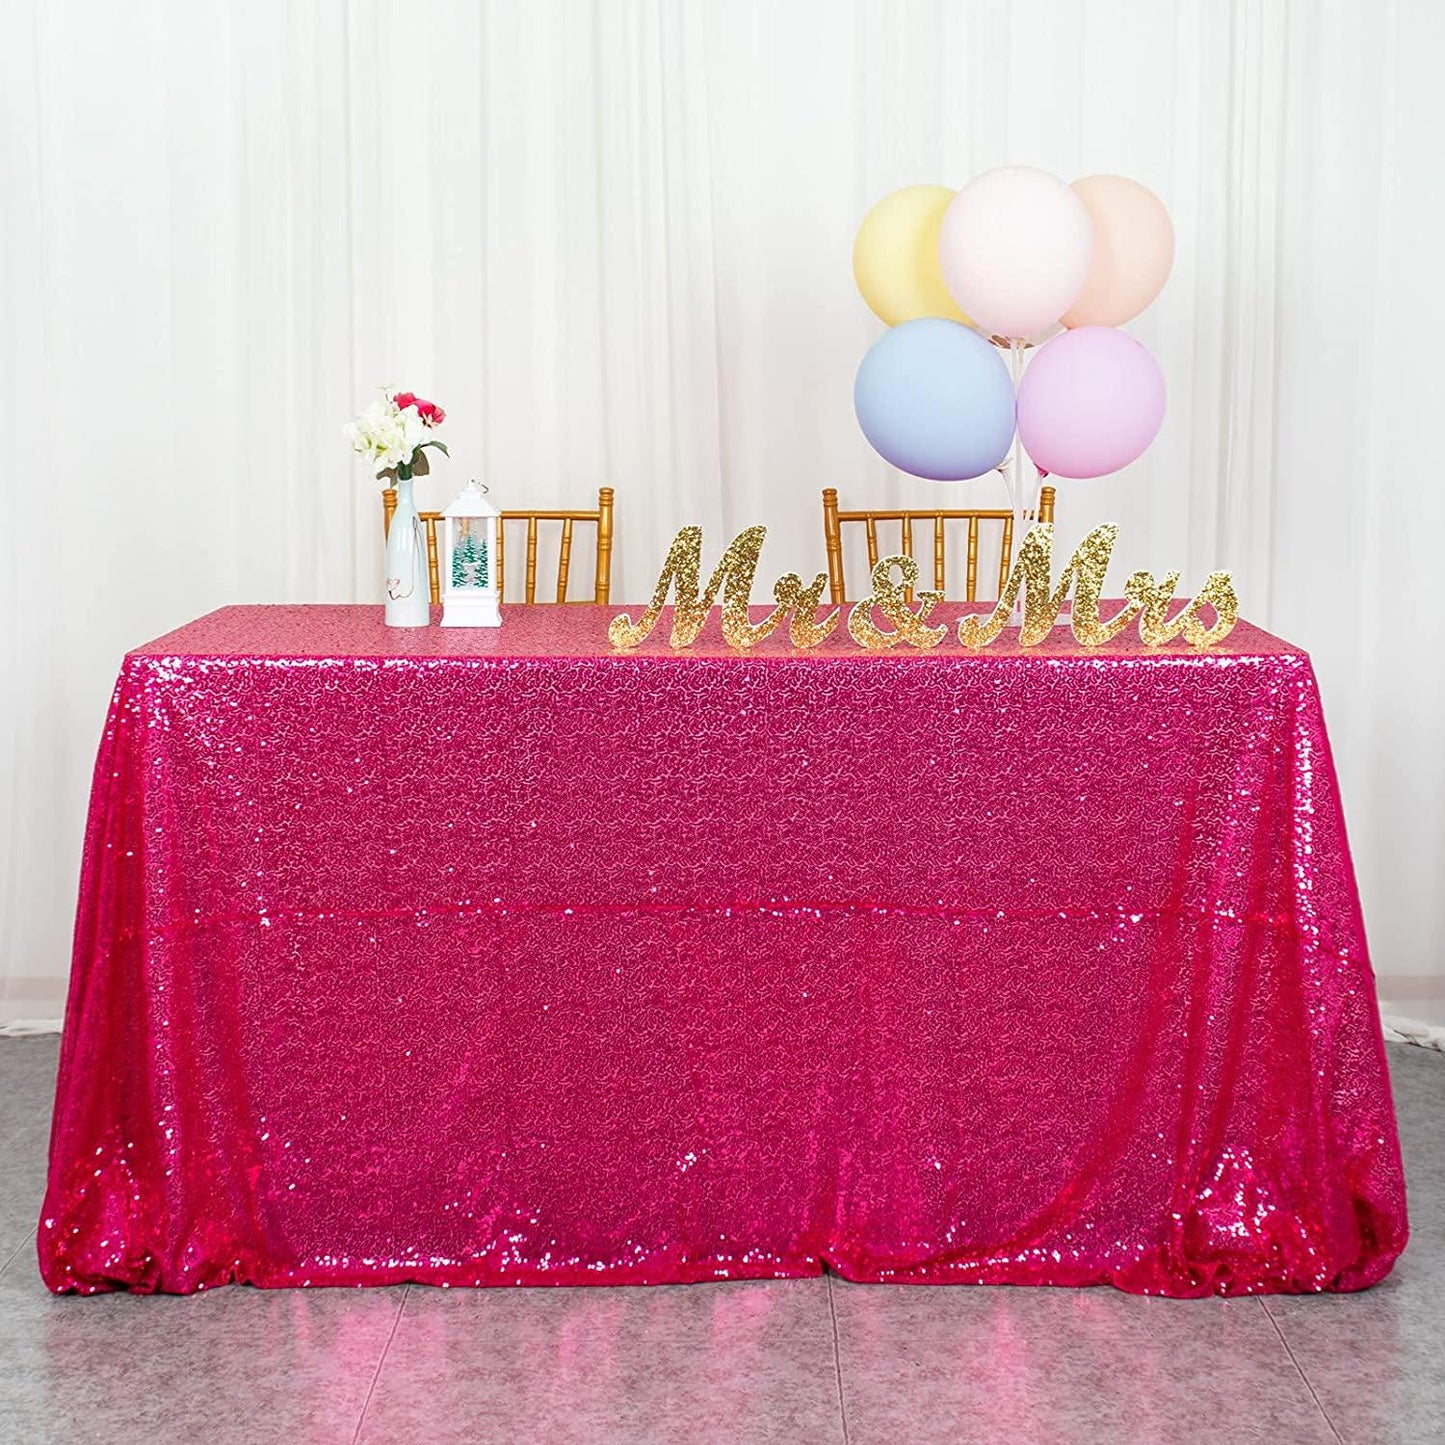 50''x50'' Square Silver Sequin Tablecloth Select Your Color & Size Can Be Available ! Sequin Overlays, Runners, Gatsby Wedding, Glam Wedding Decor - If you say i do